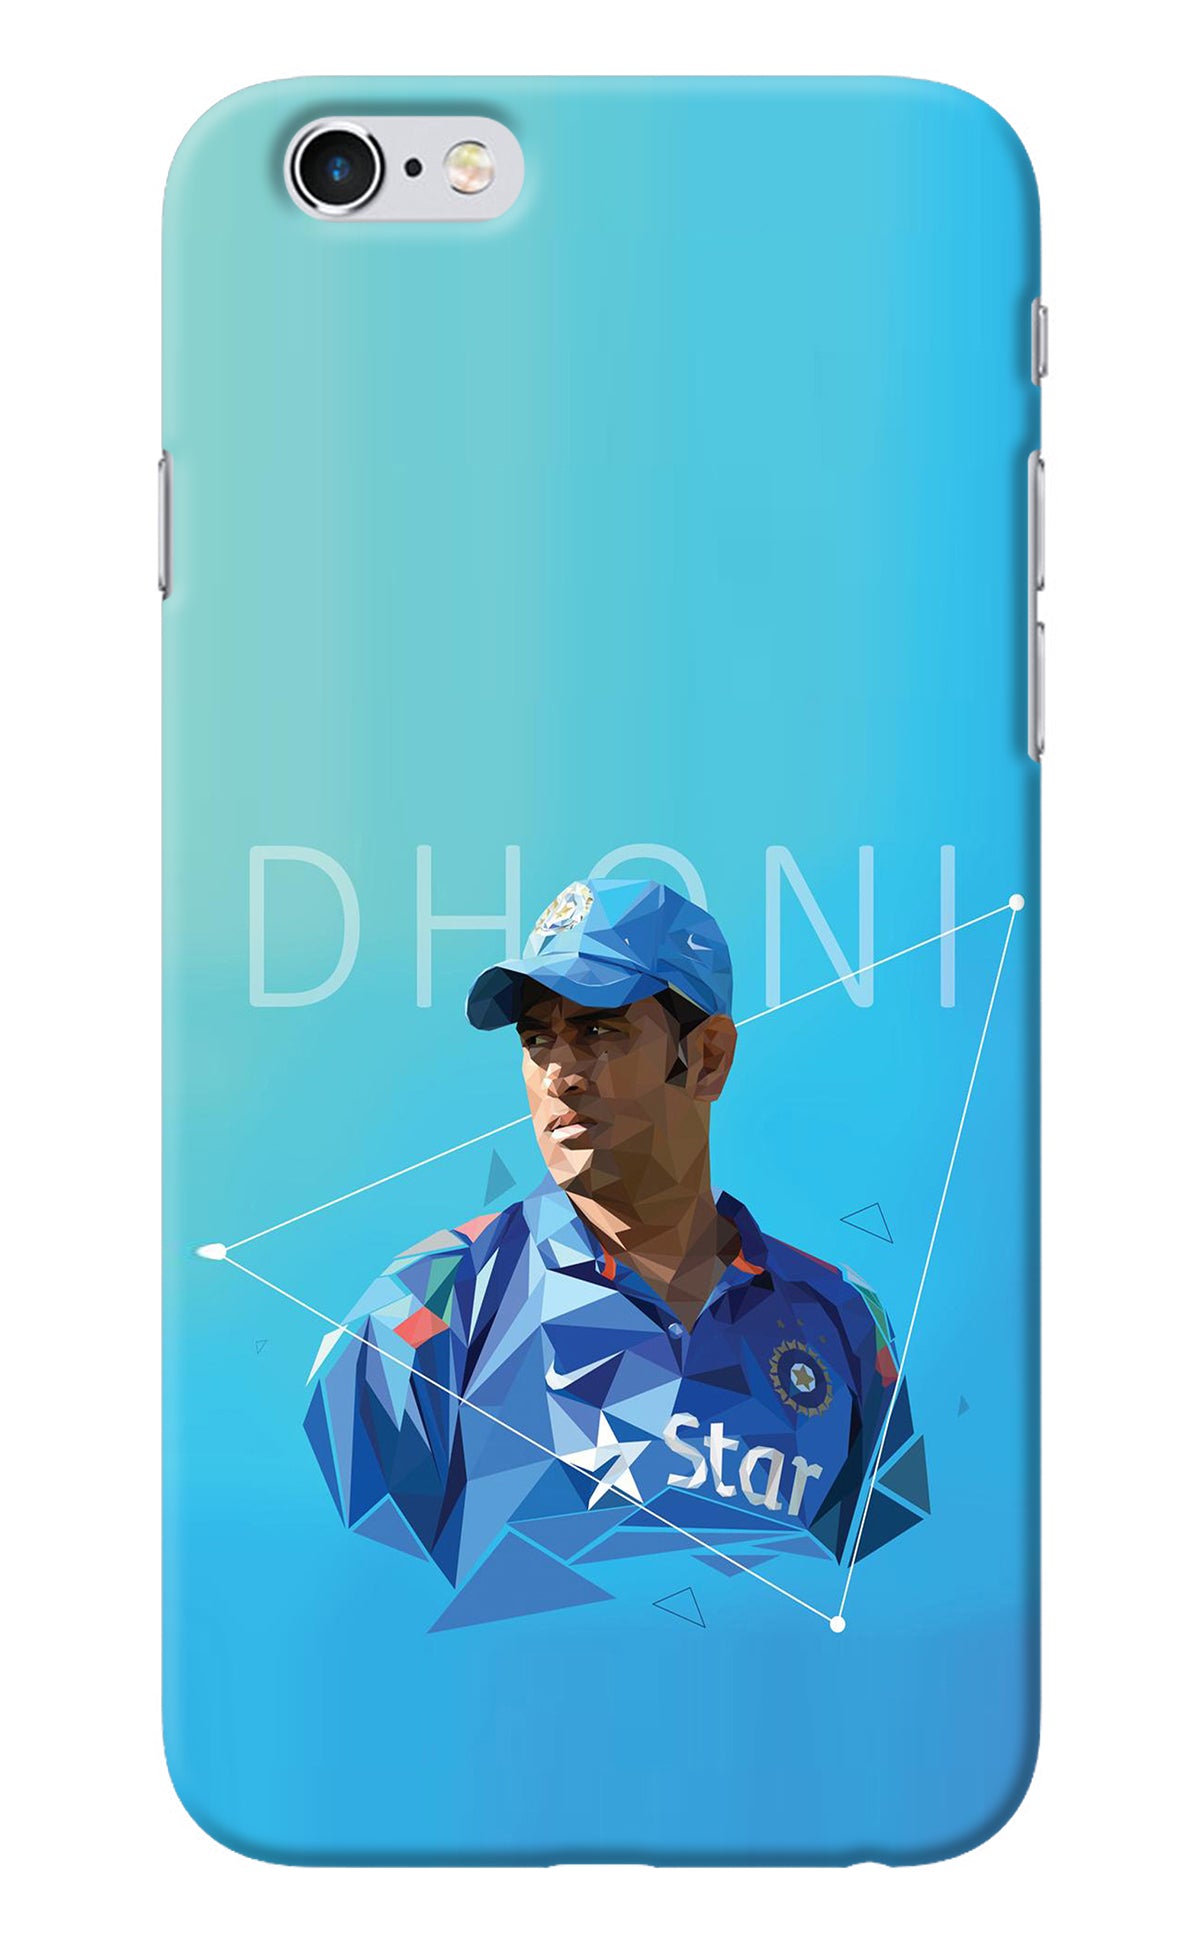 Dhoni Artwork iPhone 6/6s Back Cover